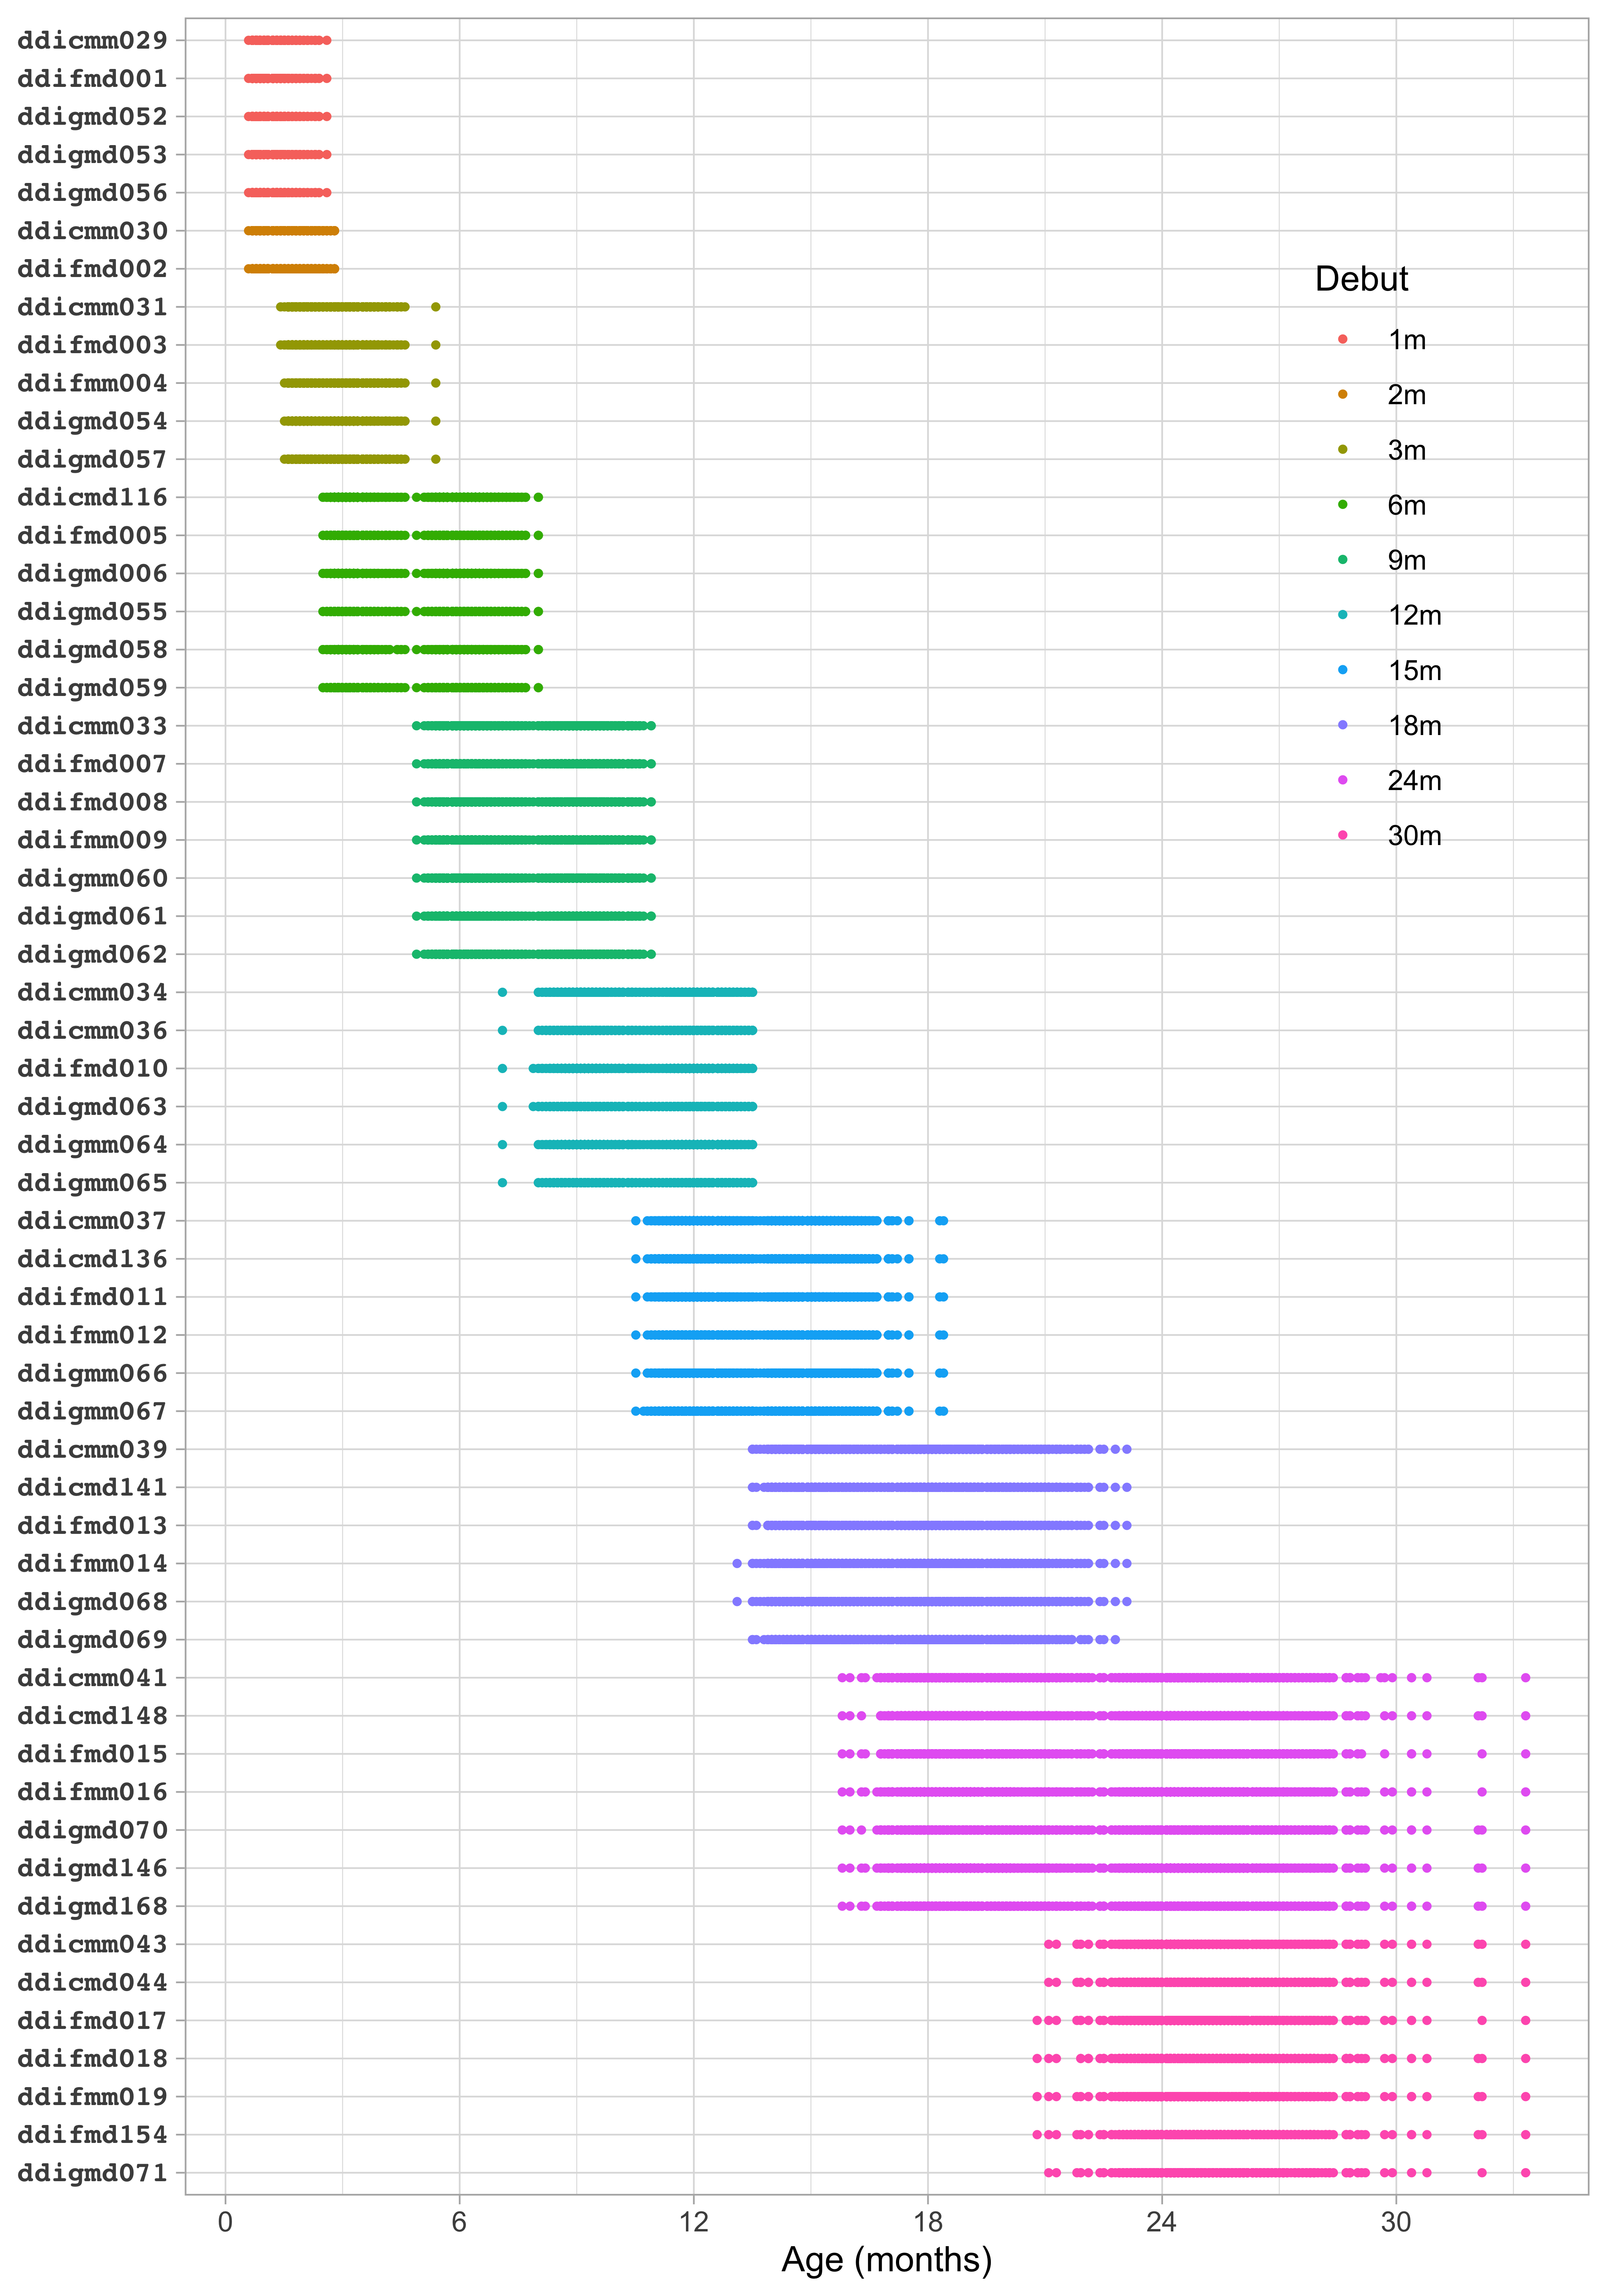 Age-item grid of the SMOCC study, illustrating how the 57 DDI items are distributed over nine visits during the first 24 months.